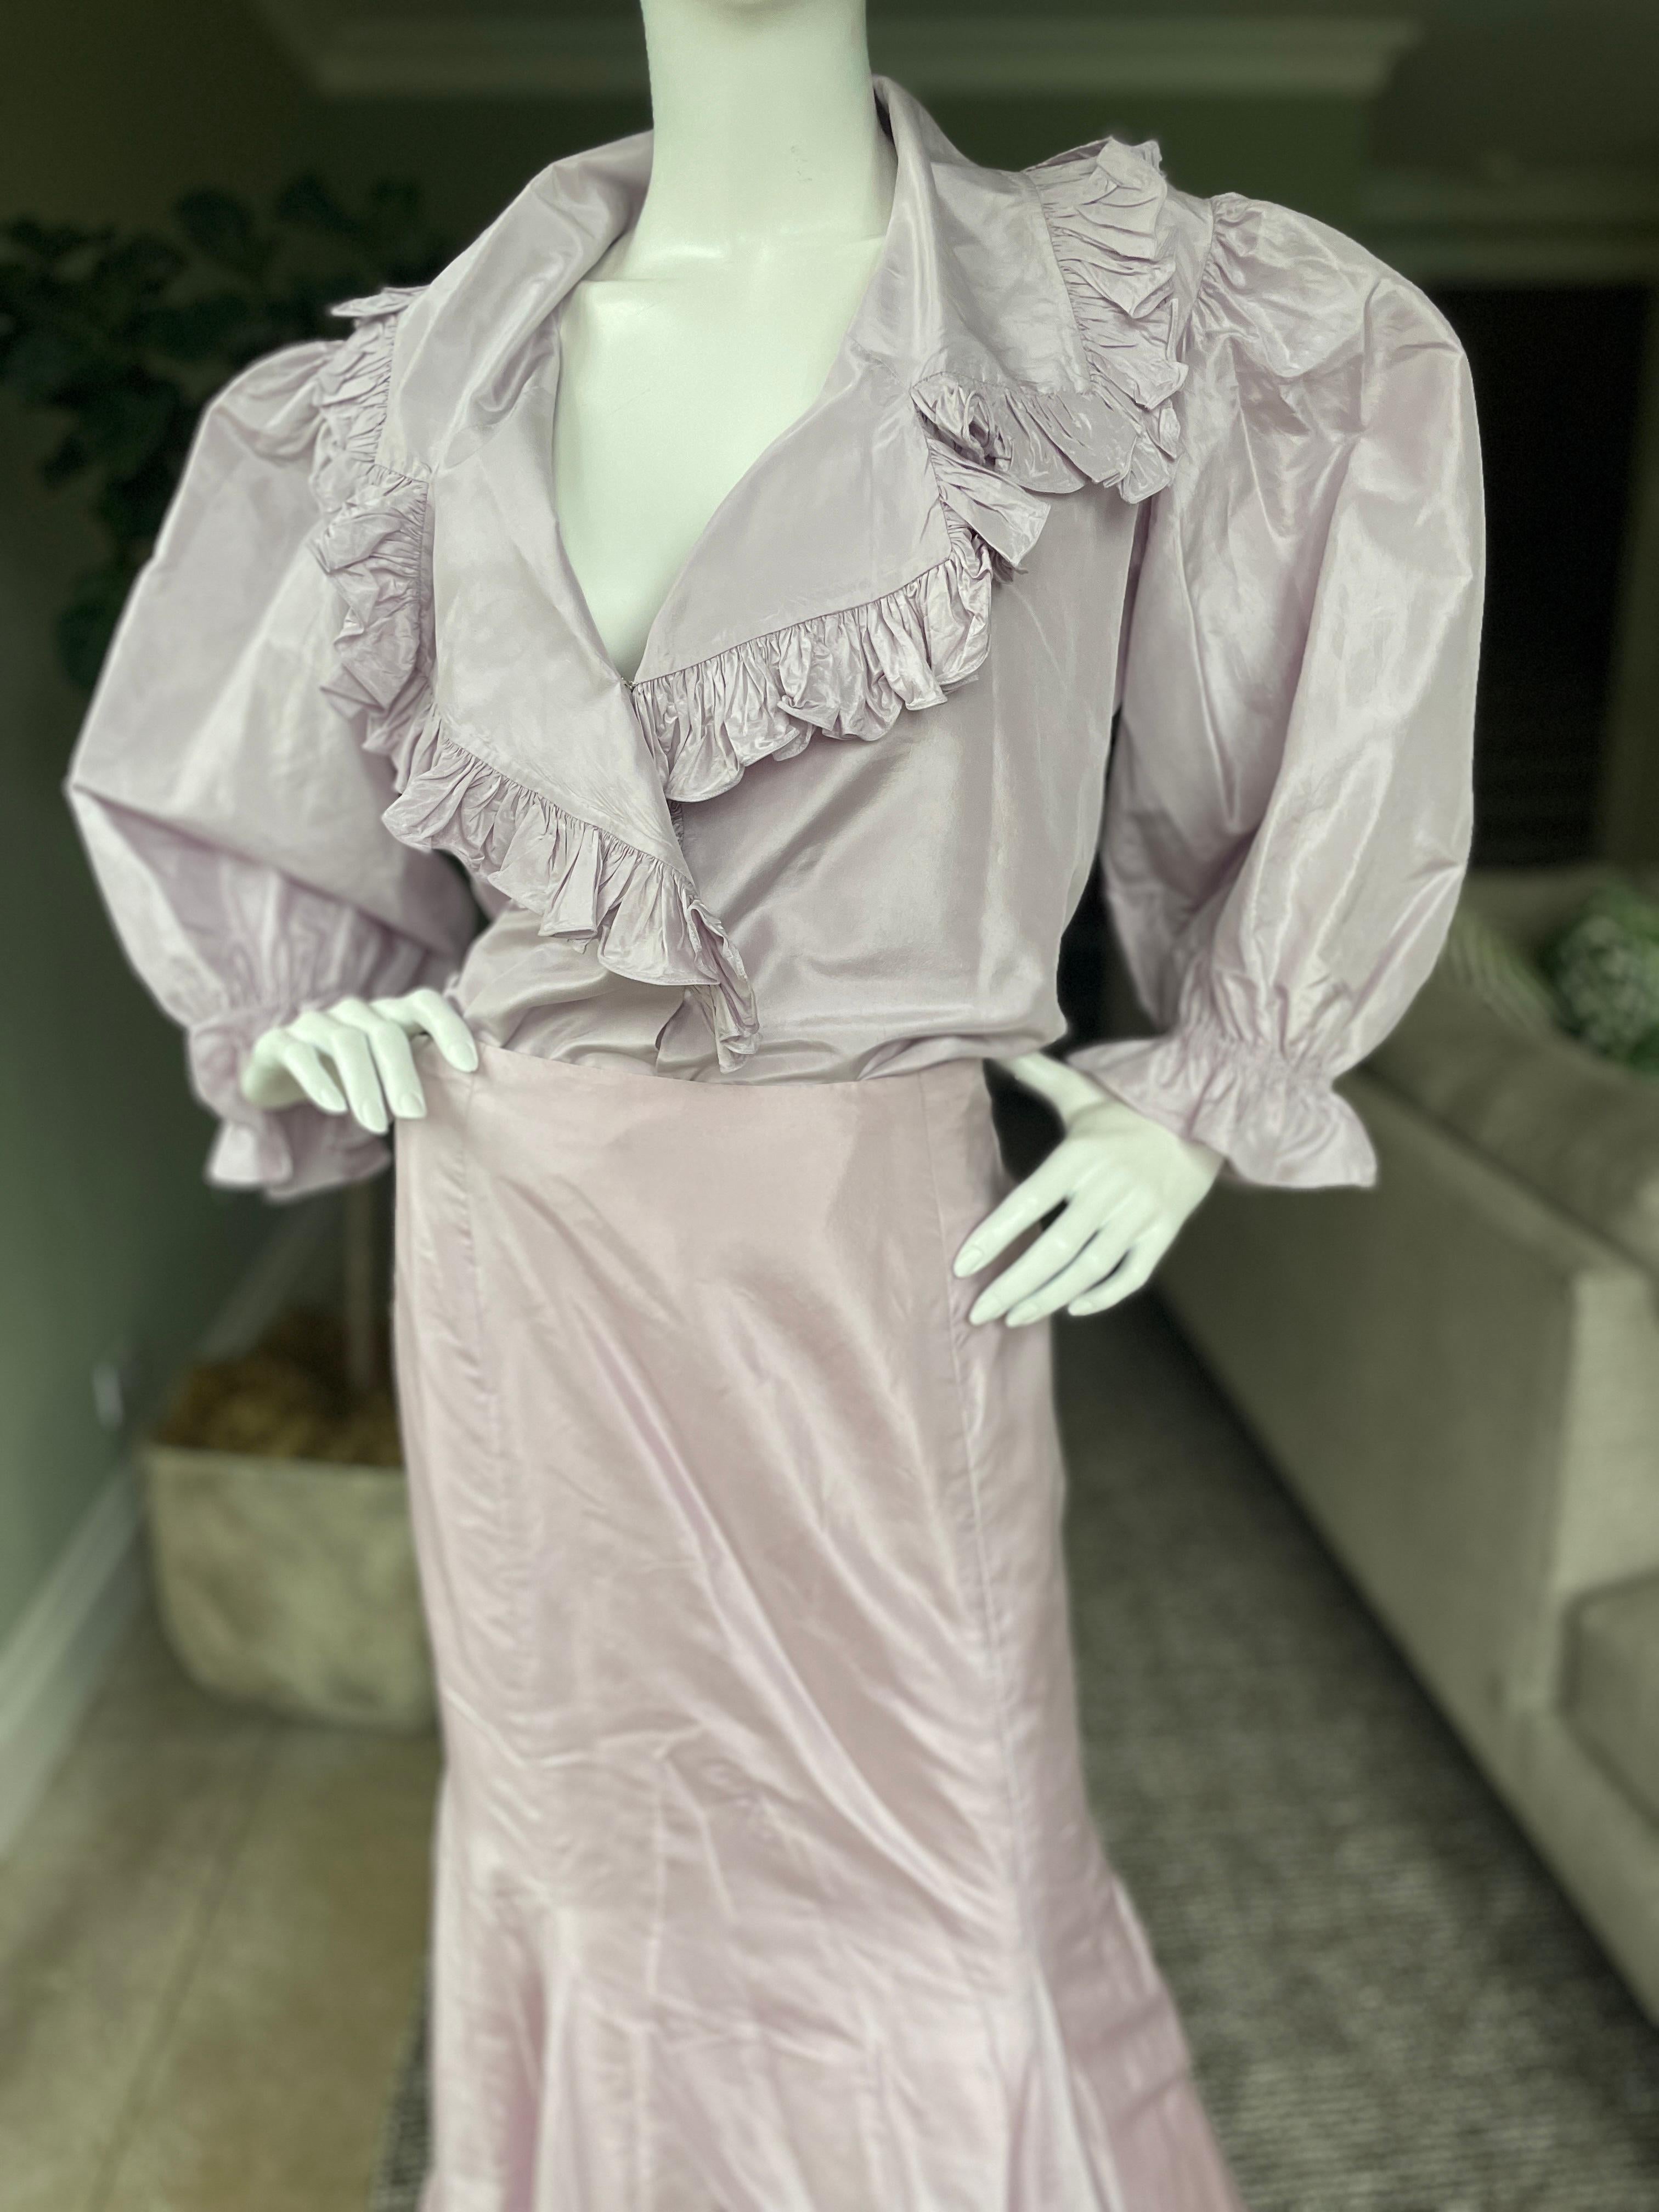 Oscar de la Renta Vintage 80's Mauve Silk Taffeta 2 Pc Evening Dress
Featuring a long sleeve top with ruffles and a ball skirt with fishtail back and ruffled hem.
It is much more purple ping than the colors show, most accurate in the skirt